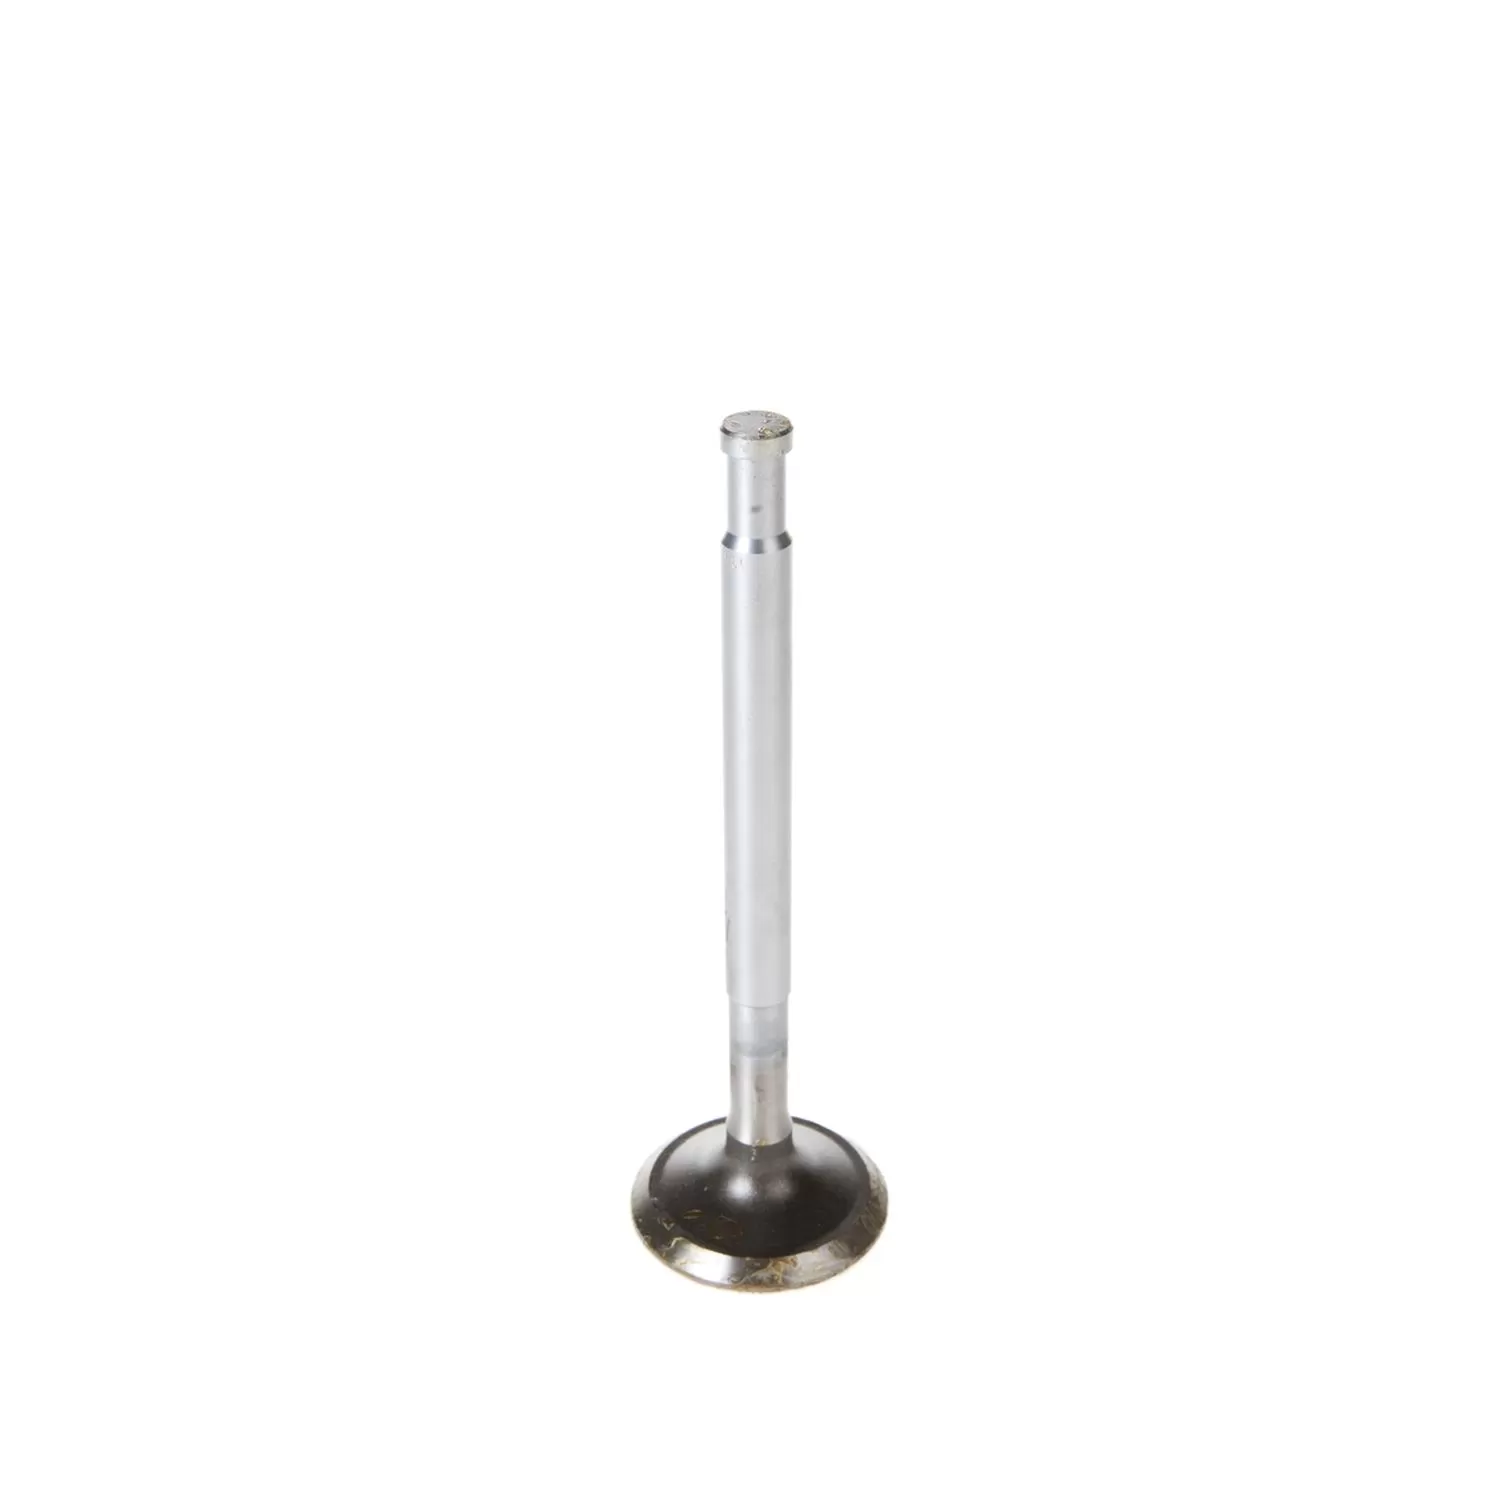 Melling Stock Replacement Exhaust Valve - V1340